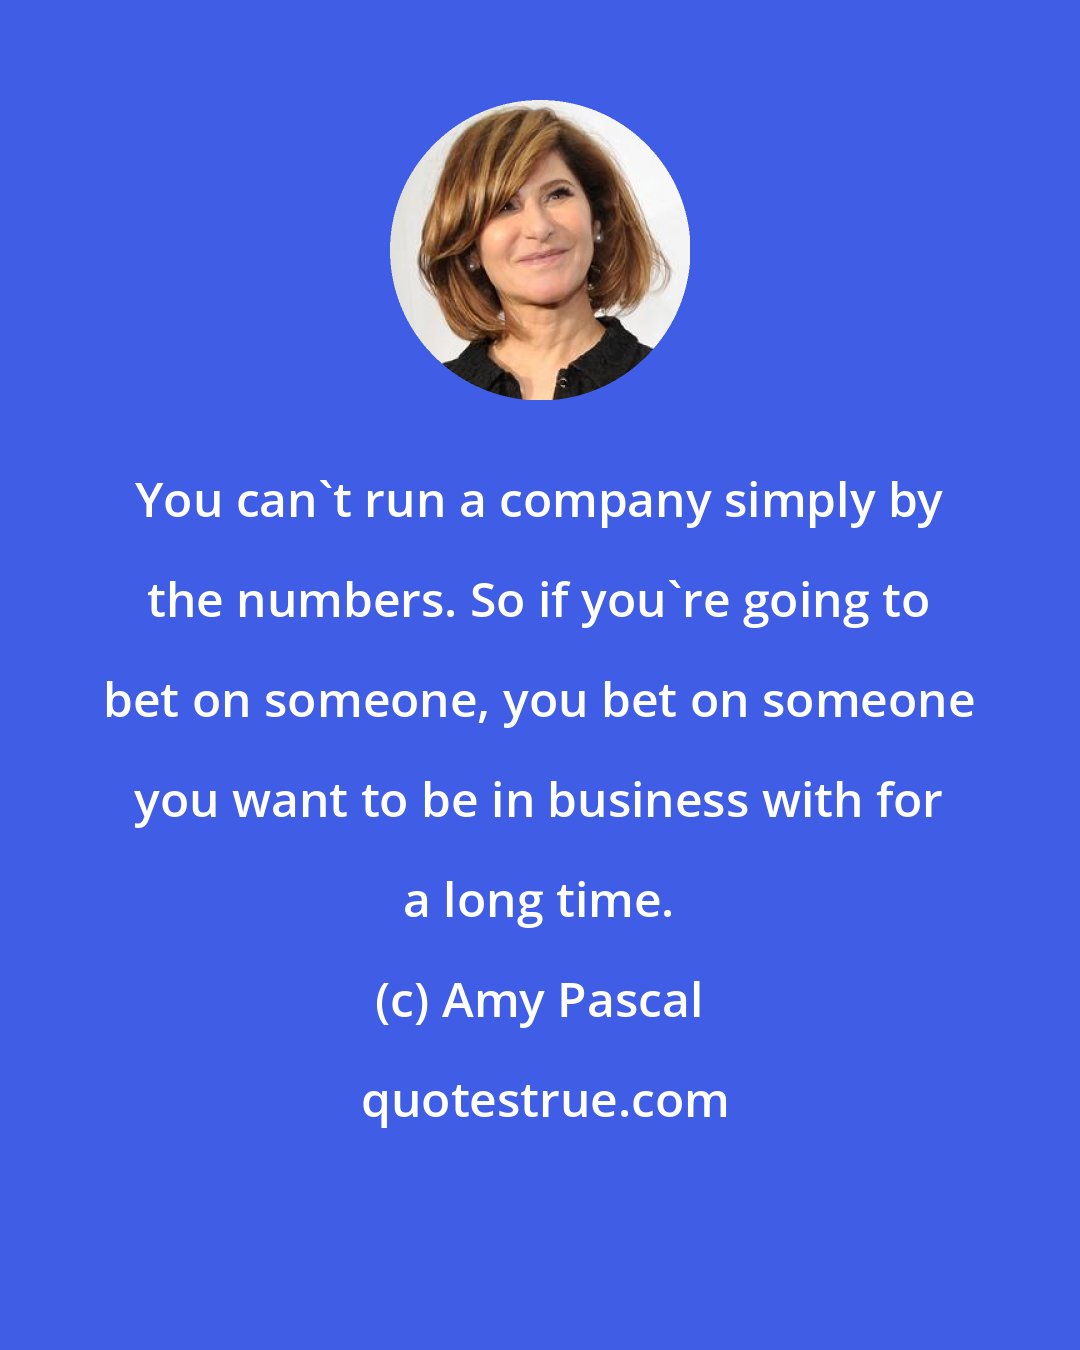 Amy Pascal: You can't run a company simply by the numbers. So if you're going to bet on someone, you bet on someone you want to be in business with for a long time.